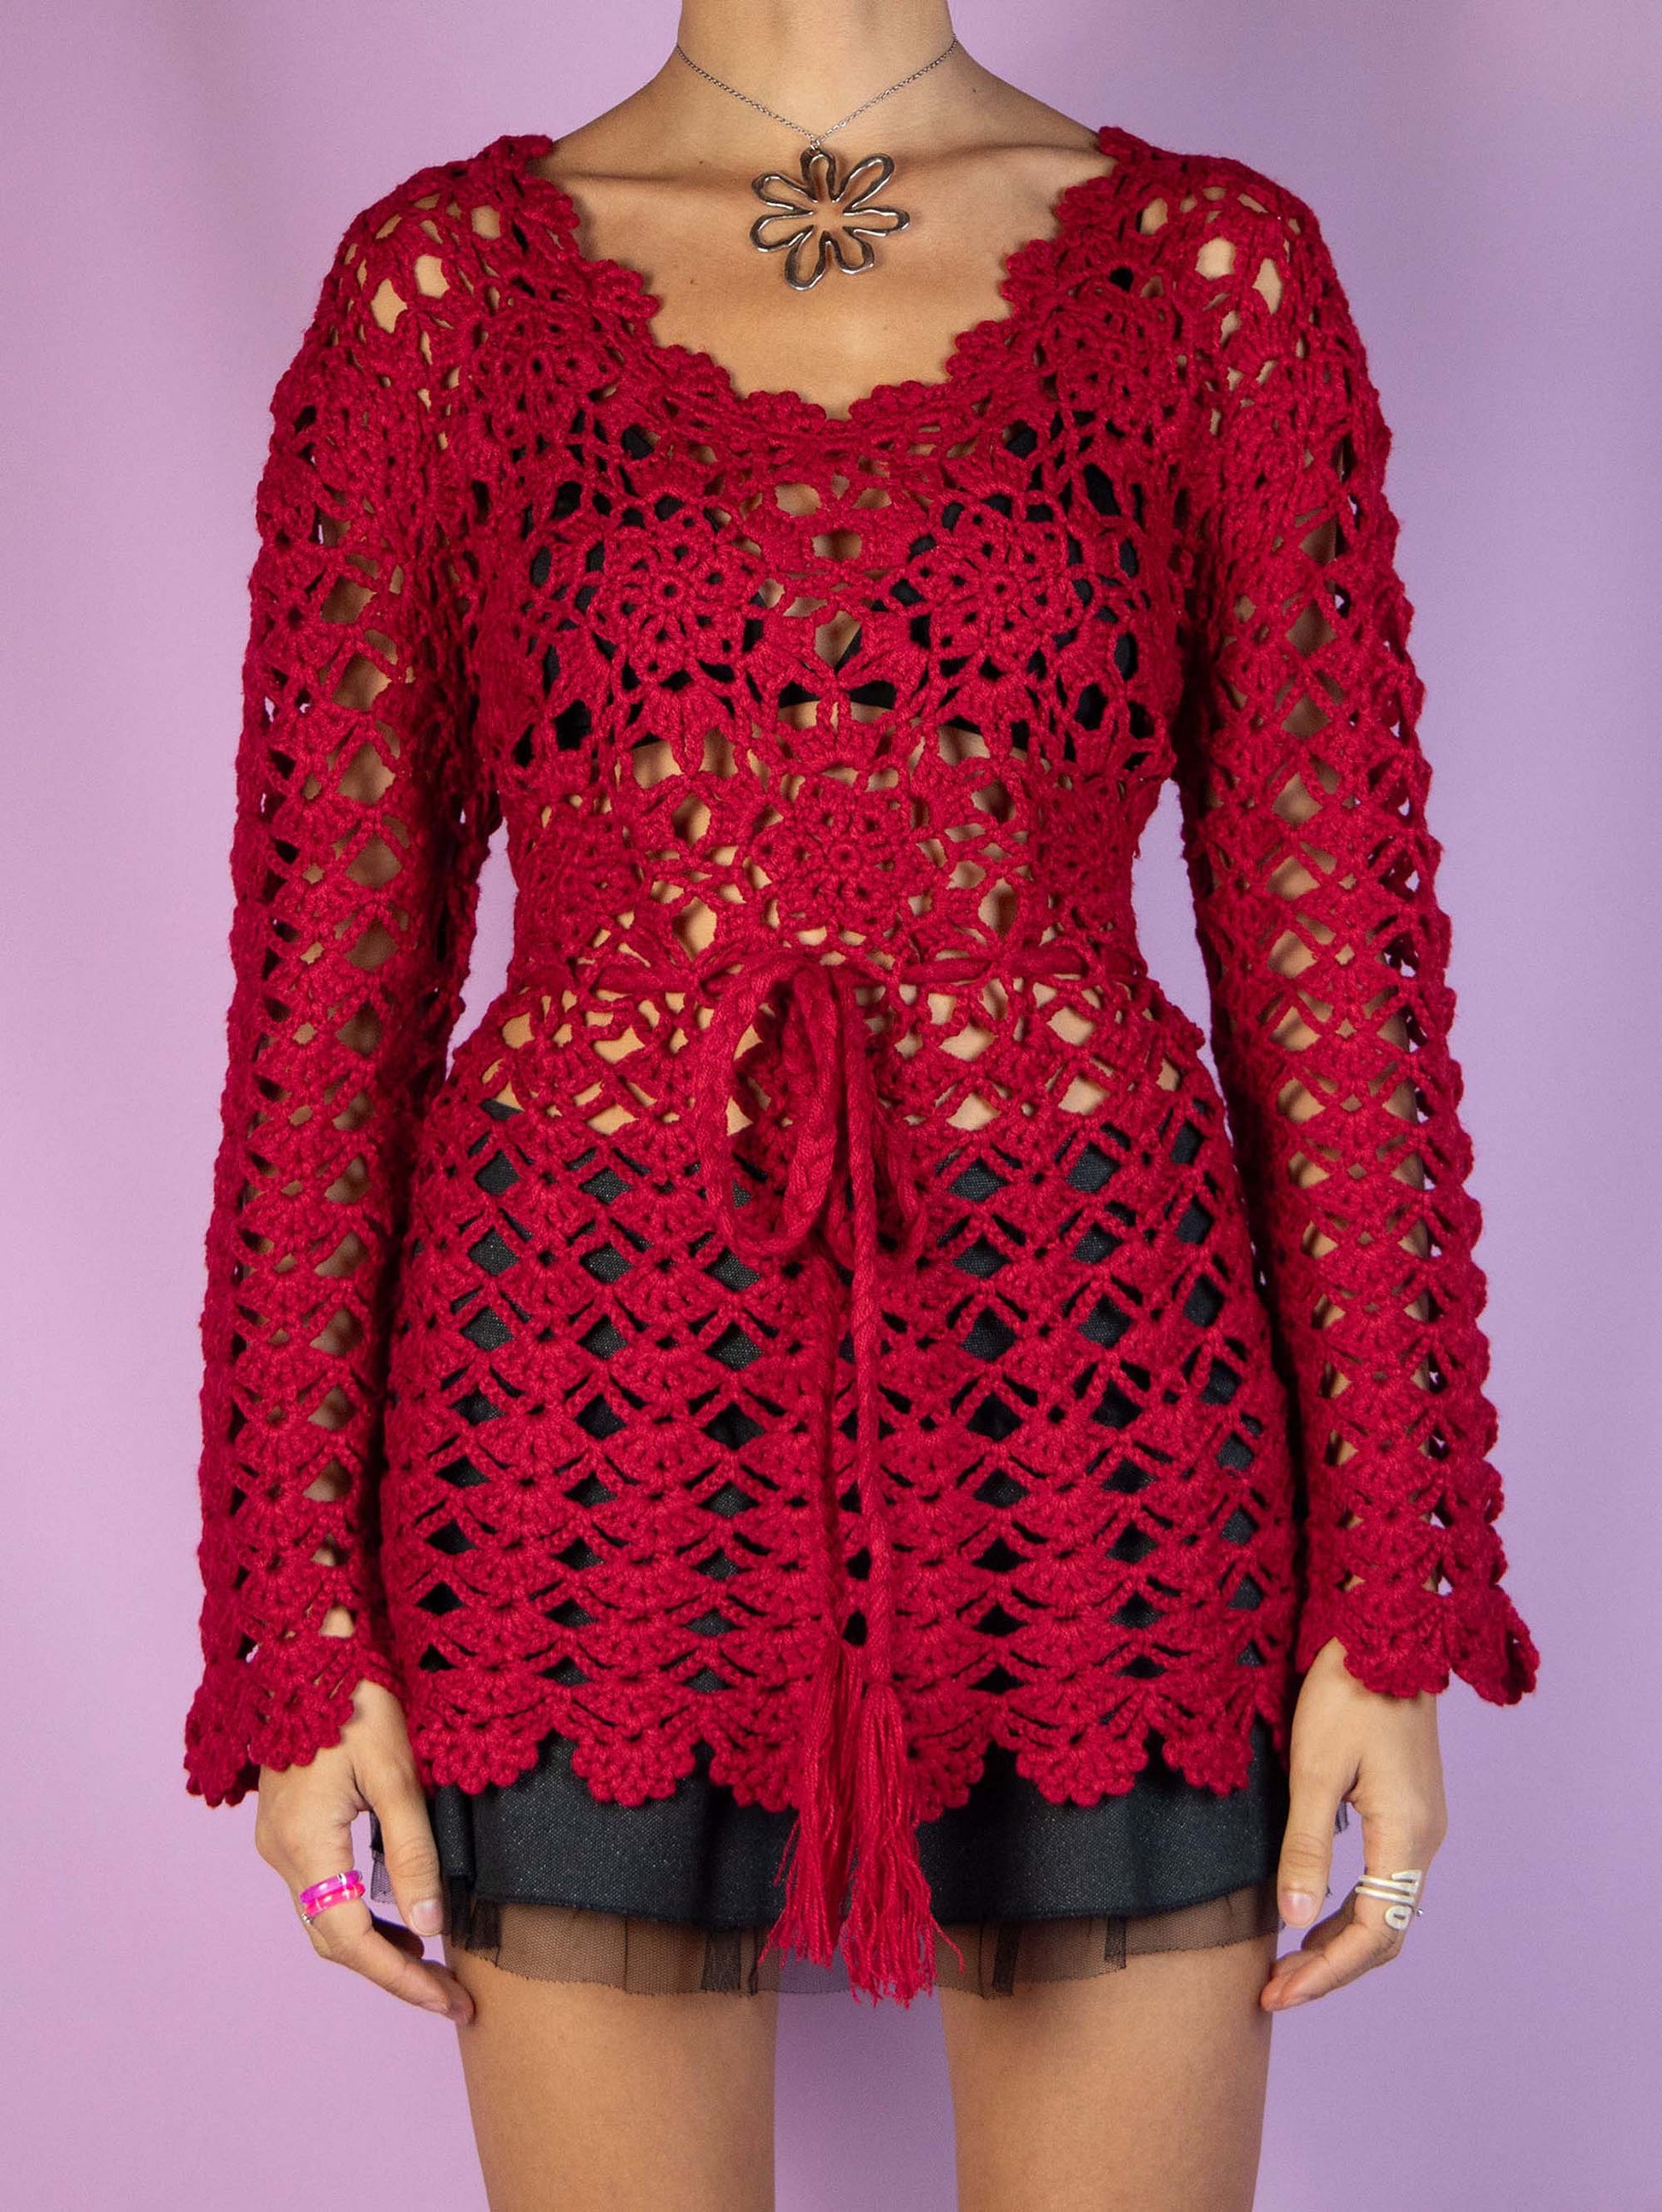 The Y2K Red Crochet Knit Sweater is a red crocheted knit top that ties at the waist and is made from a wool blend. Stunning romantic coquette boho 2000s pullover.